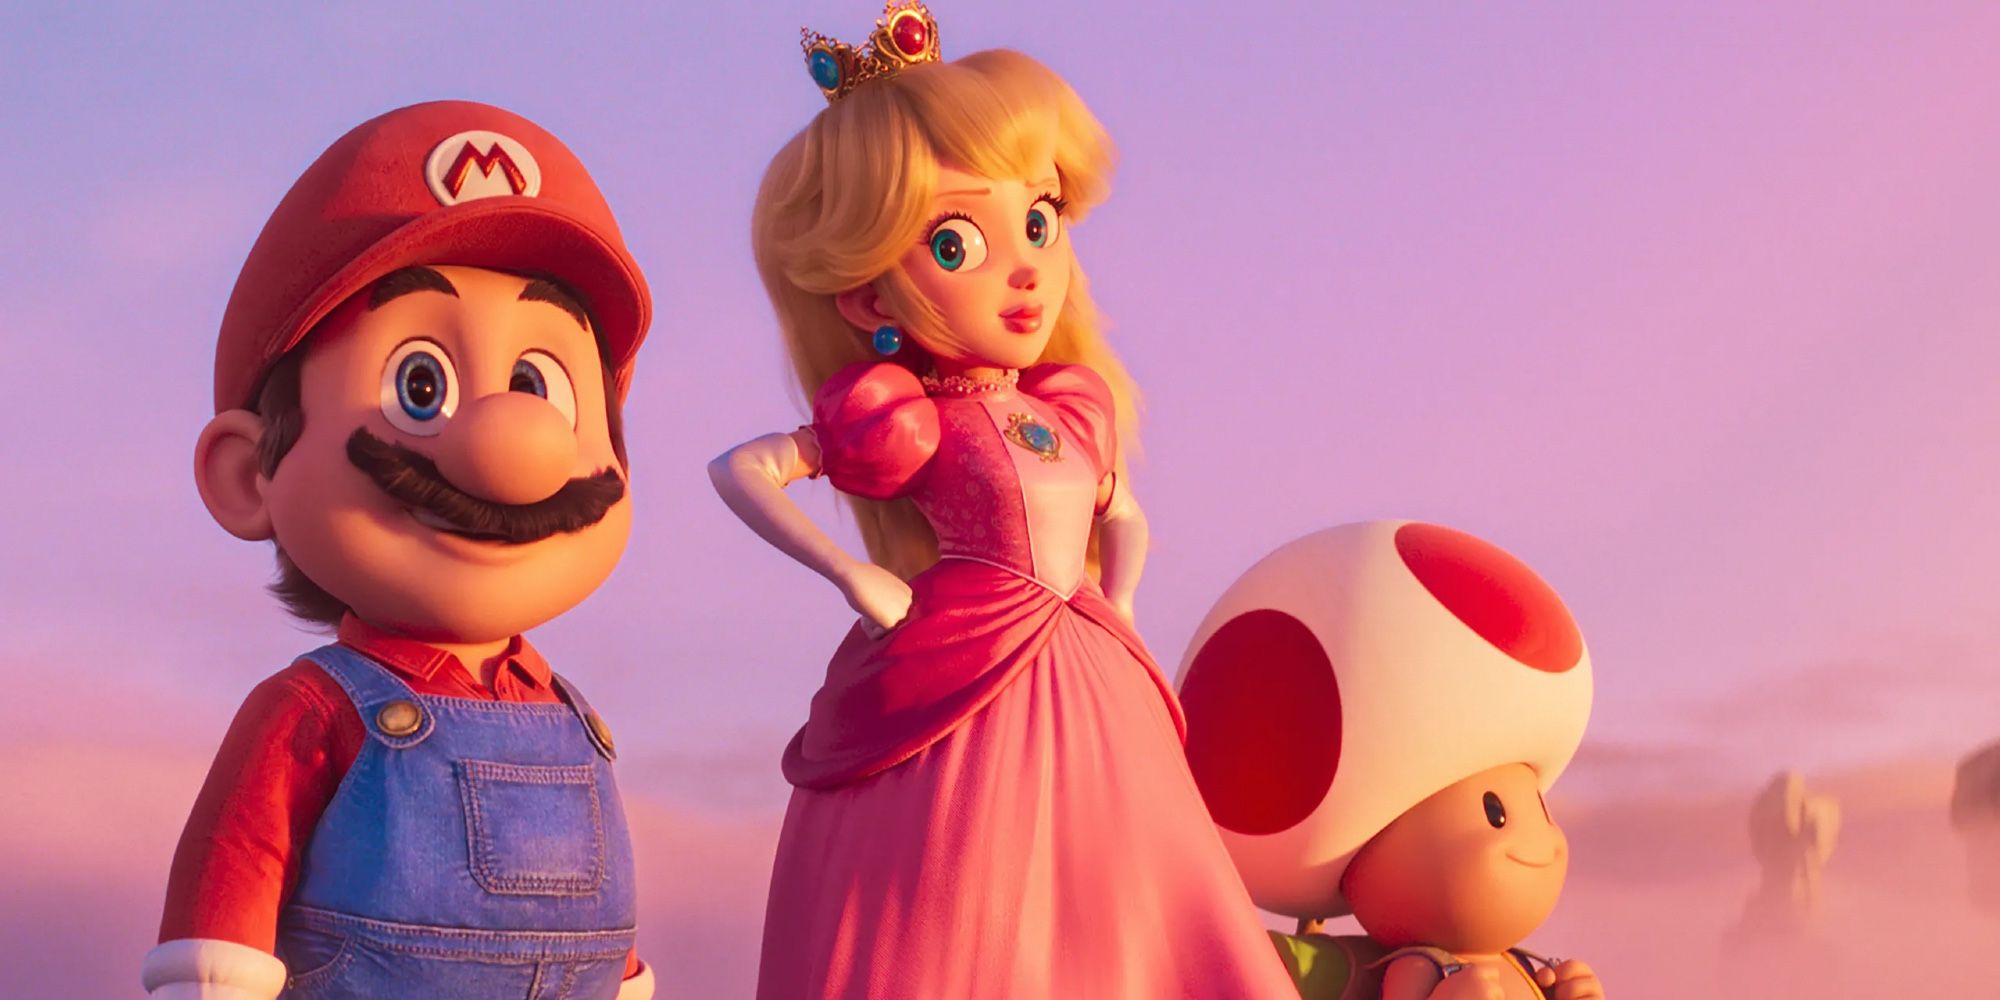 Mario and Toad looking off, while Princess Peach looks at Mario in The Super Mario Bros. Movie.